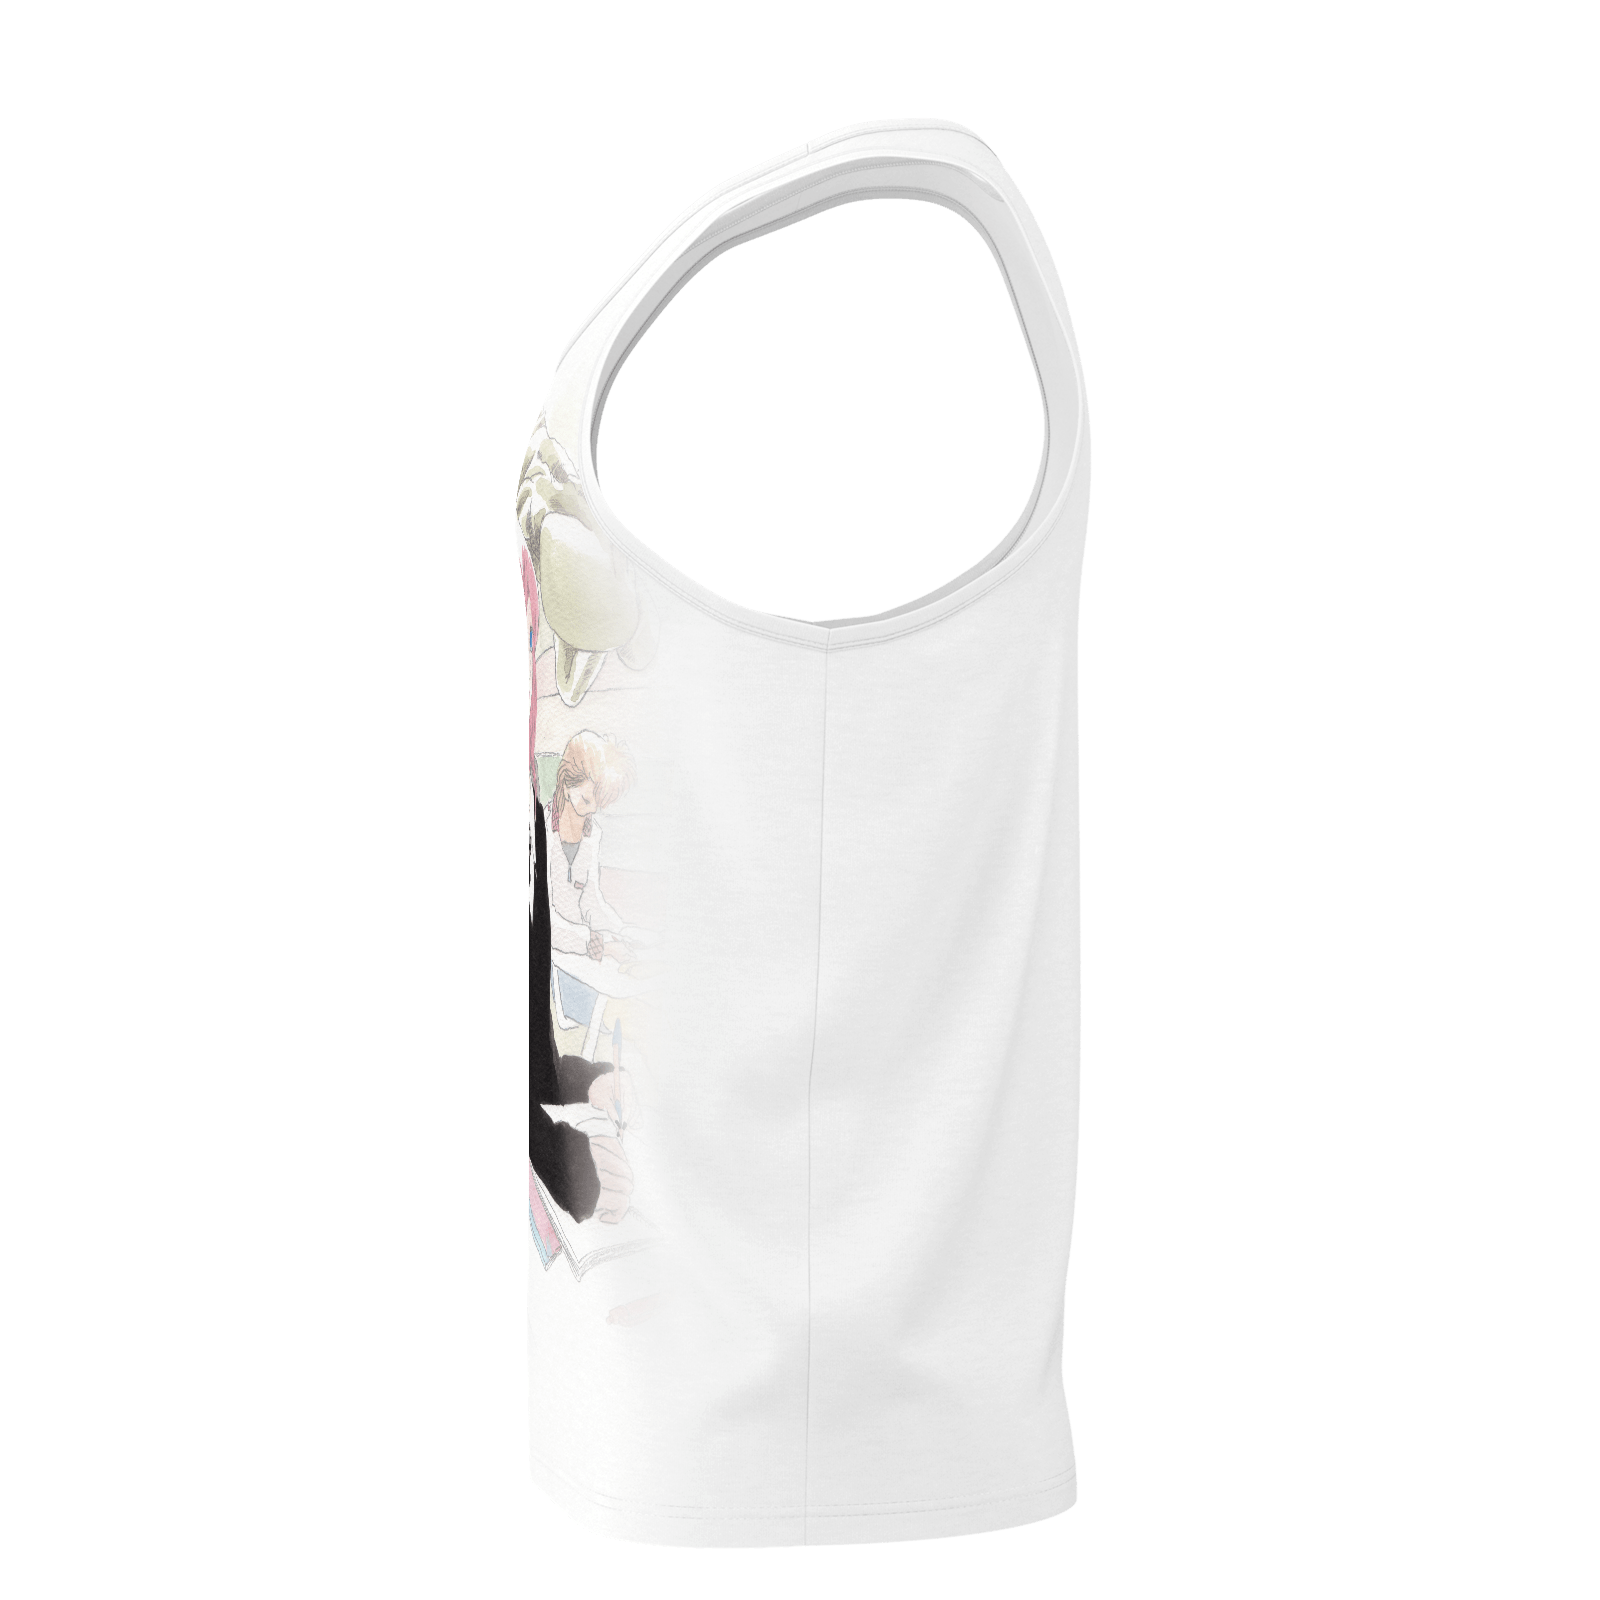 Paranoia Girls - 1 sided tank top - School - Poly 2019